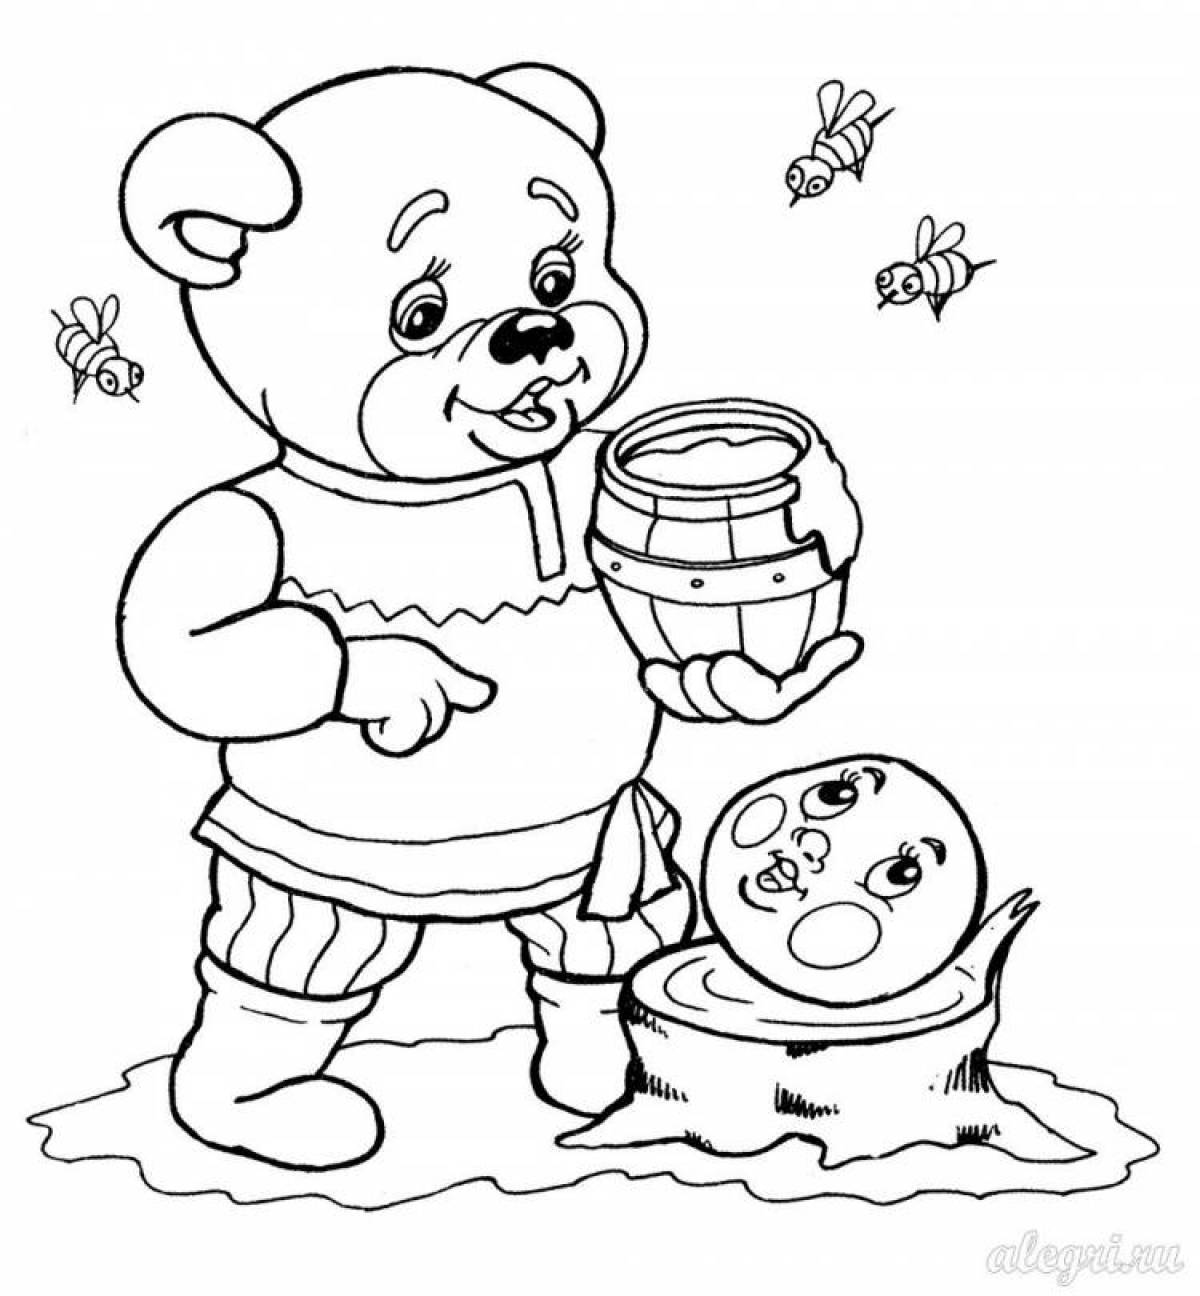 Fancy coloring kolobok for children 3-4 years old